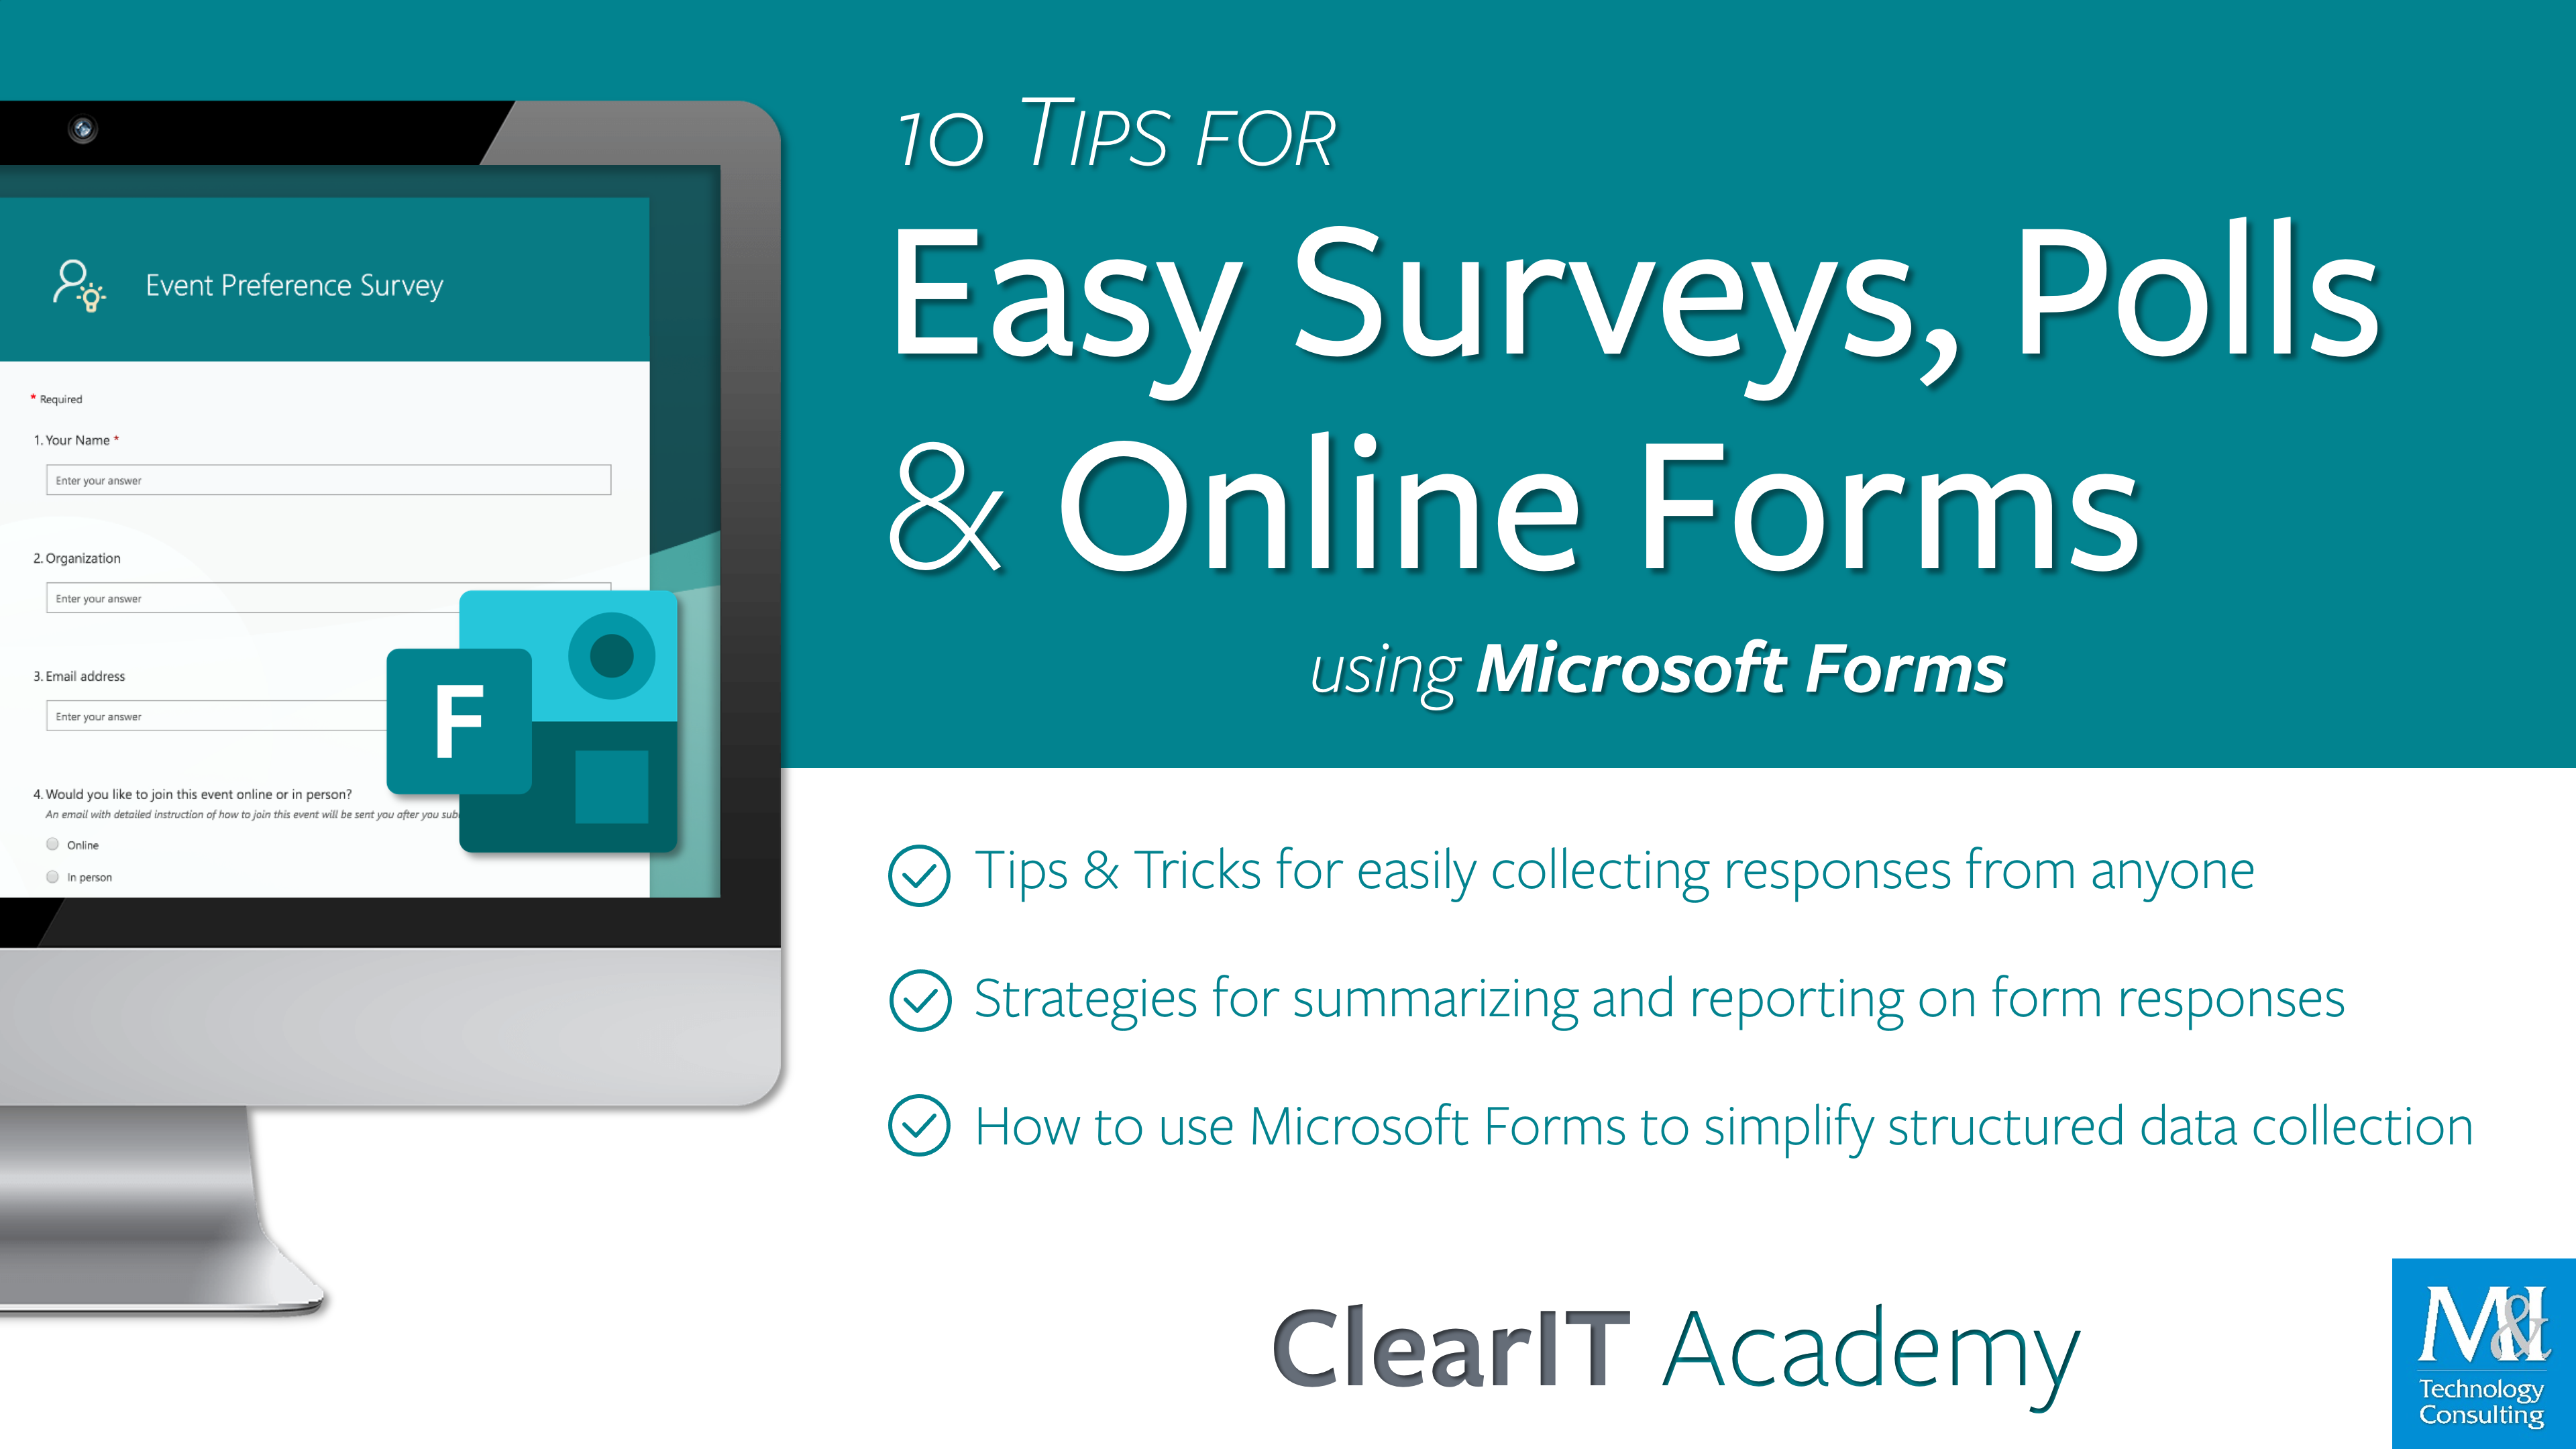 clearit-academy-easy-surveys-polls-online-forms